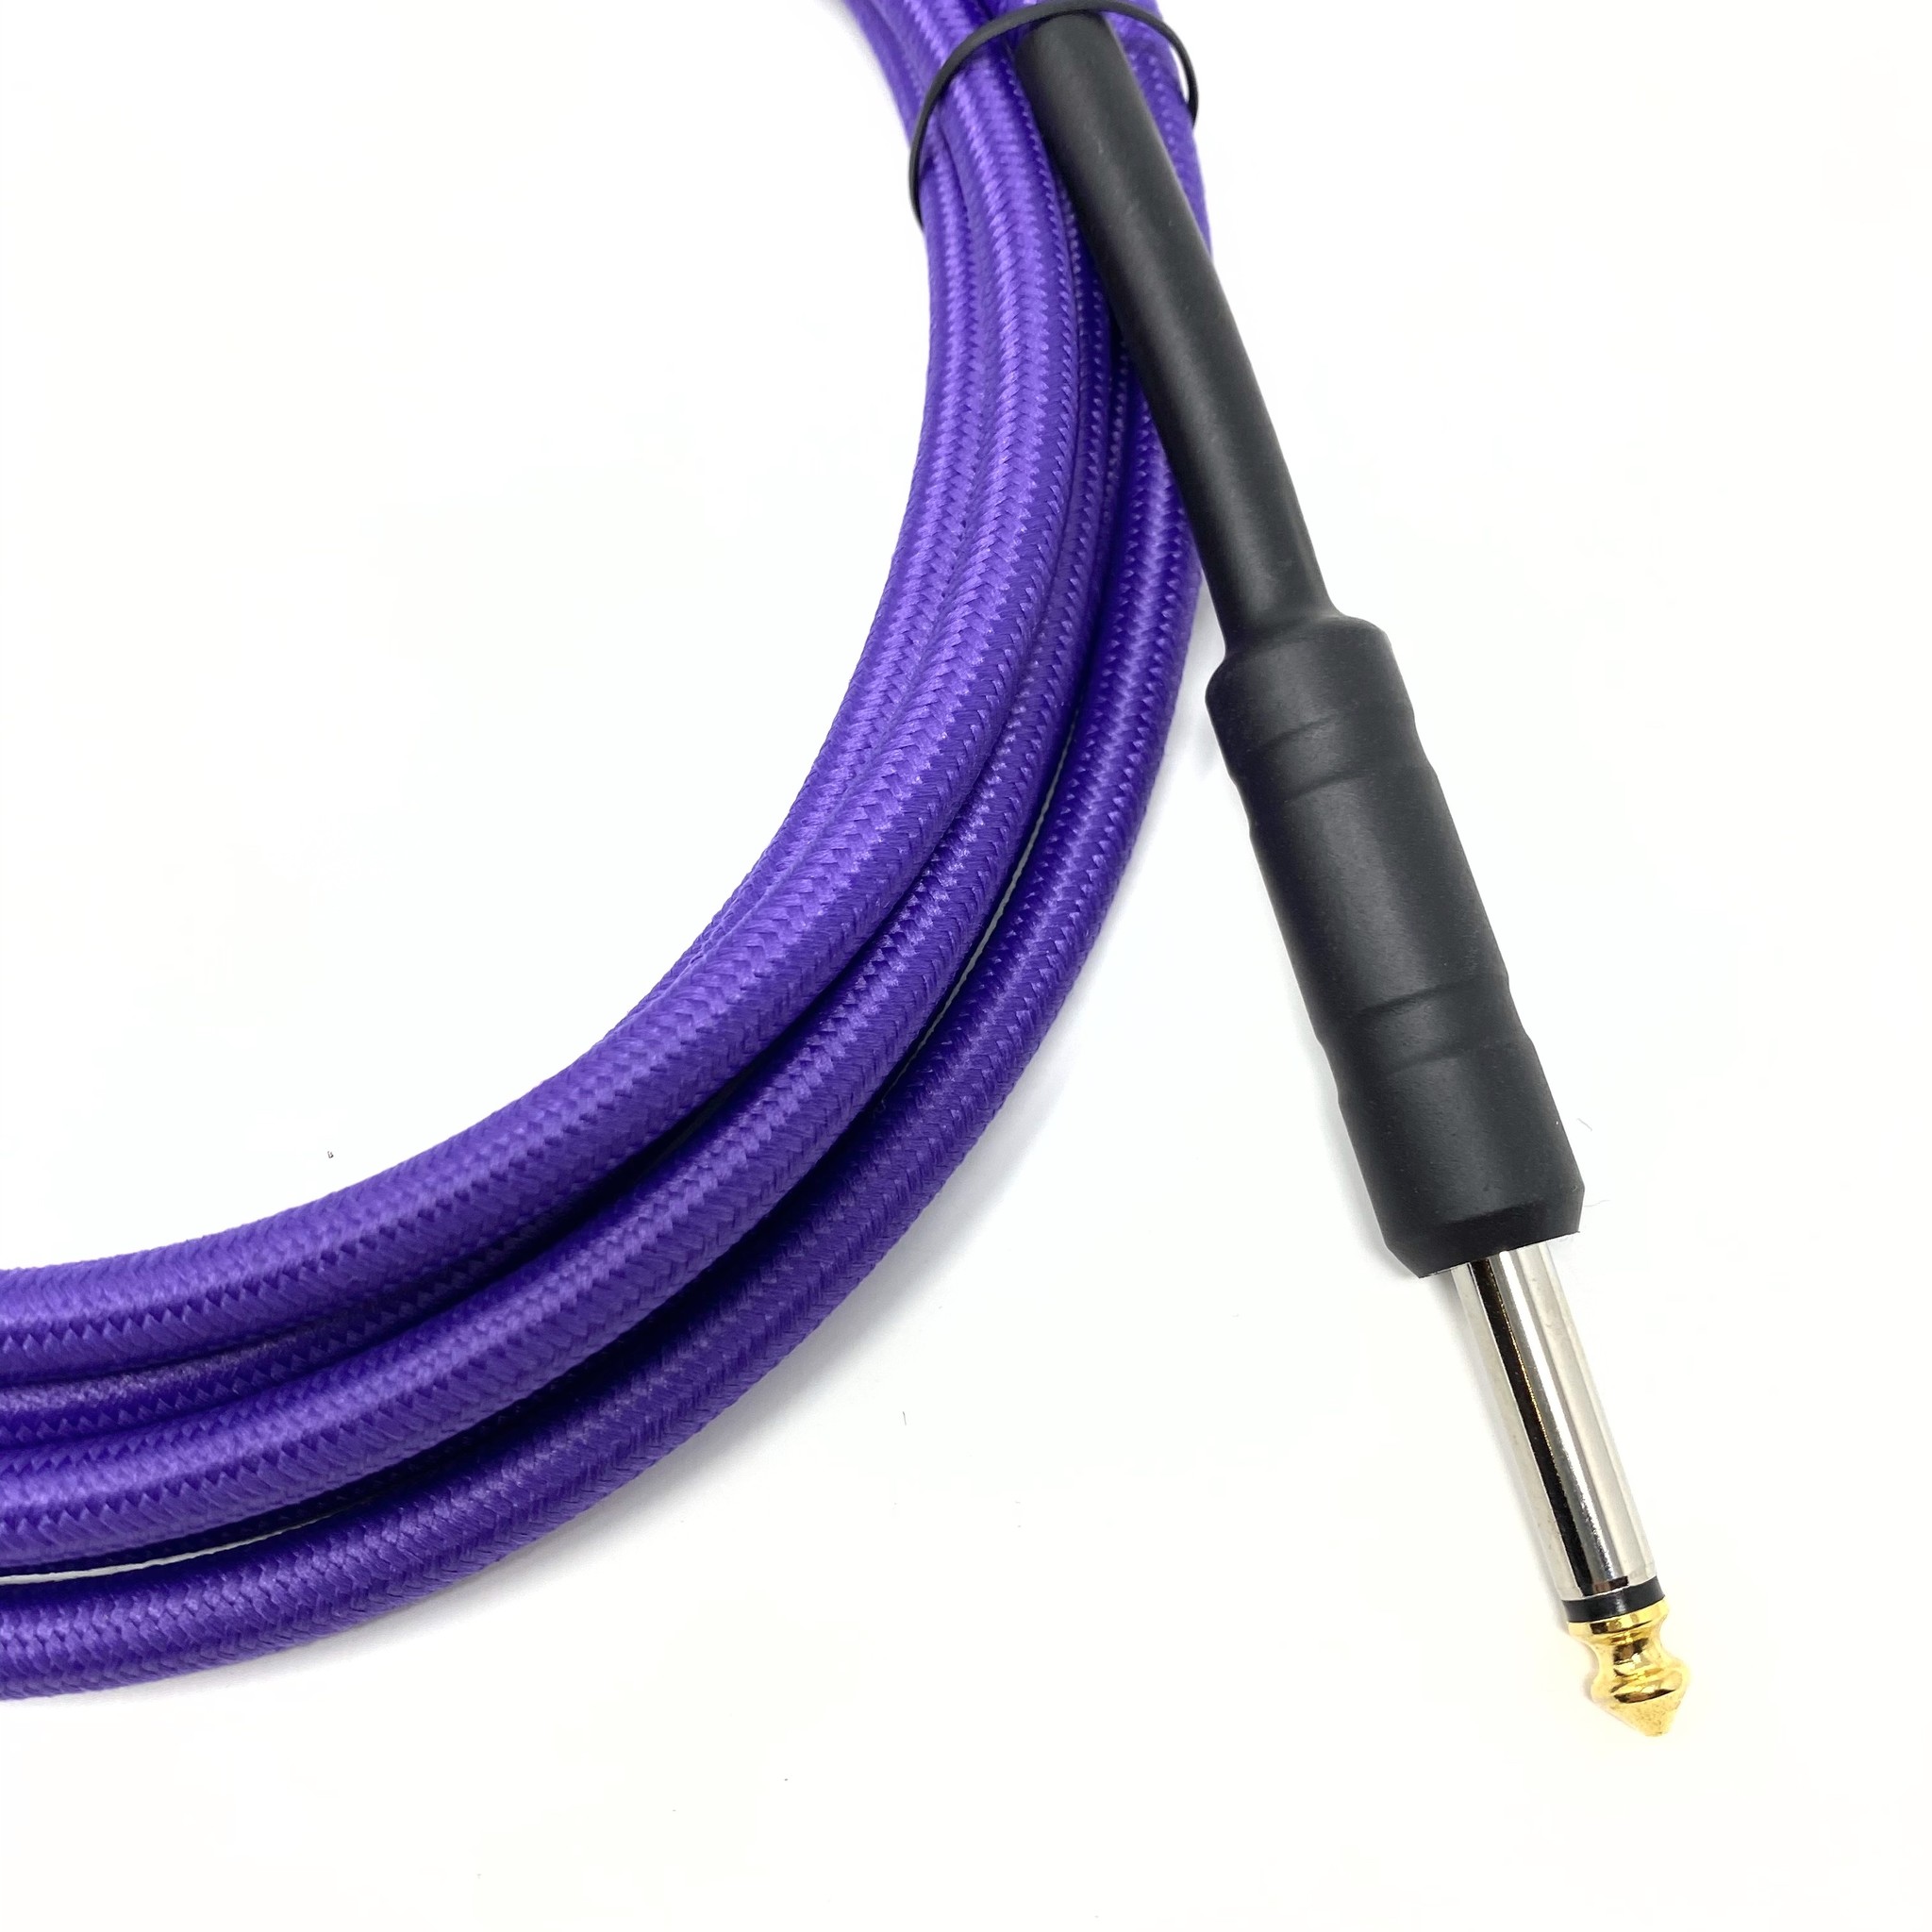 Strukture 10 ft Instrument Cable, Woven, Purple, 1/4" (Latest Version with Improved Black Wraps!)